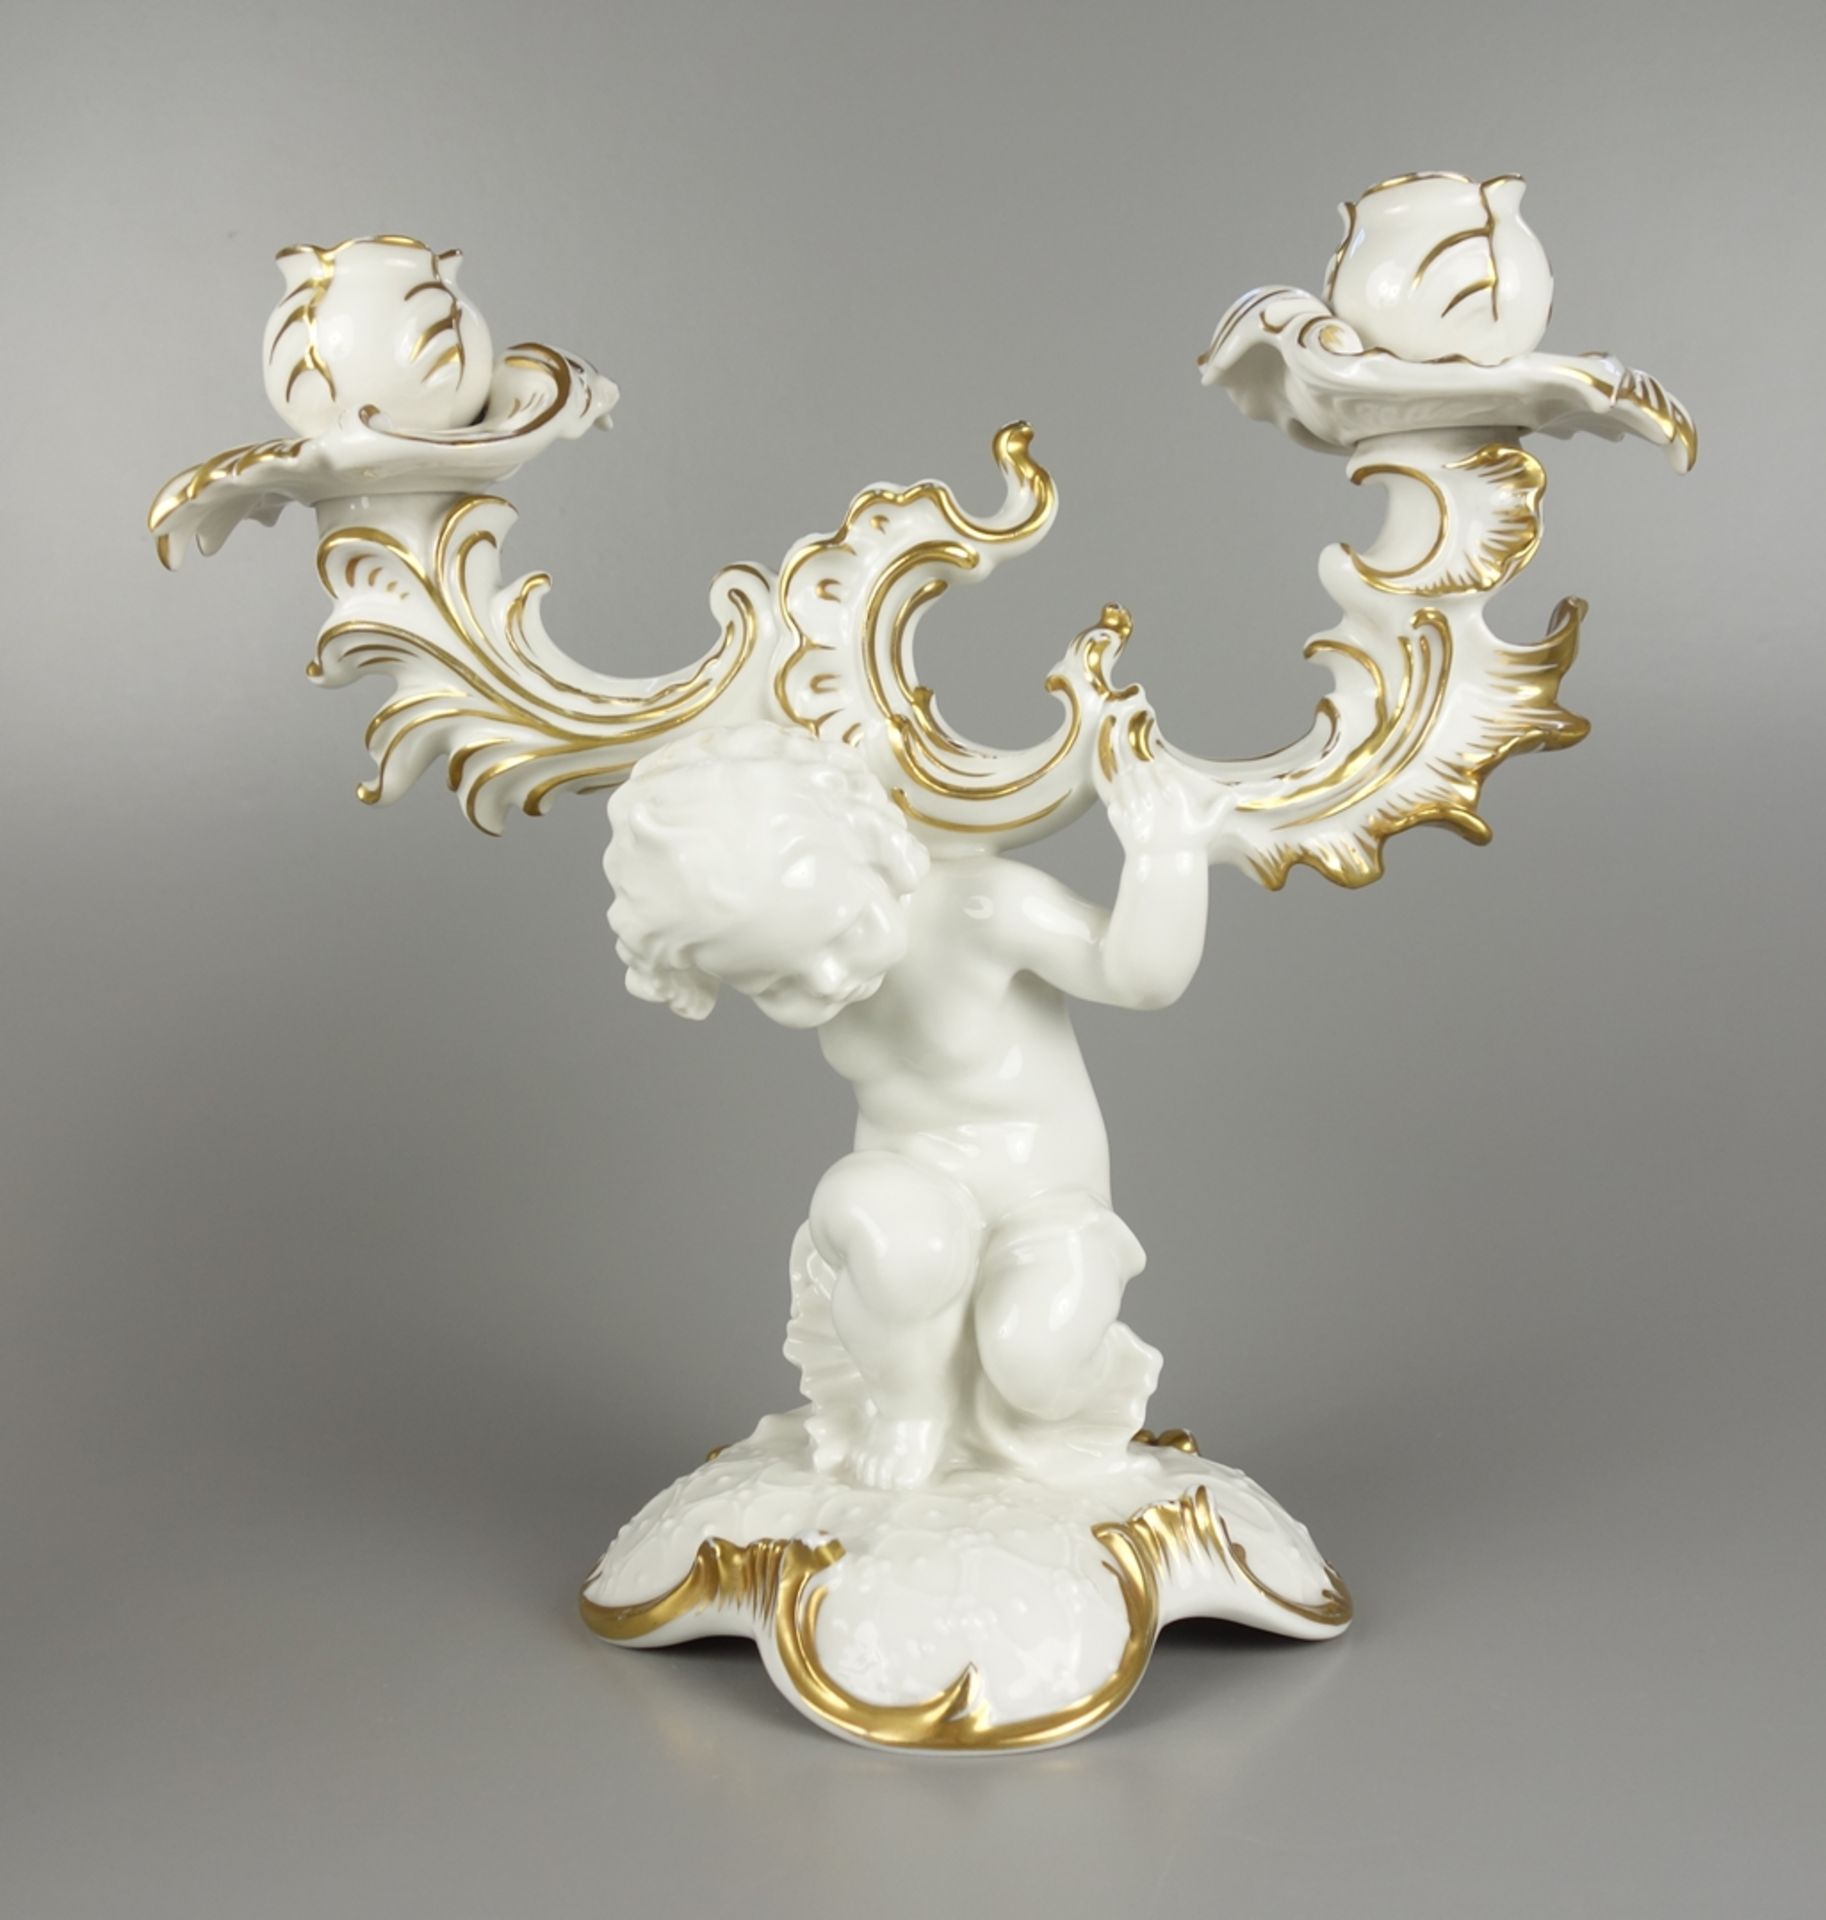 Pair of large figural candlesticks, Karl Tutter for Hutschenreuther, 1930s - Image 2 of 7